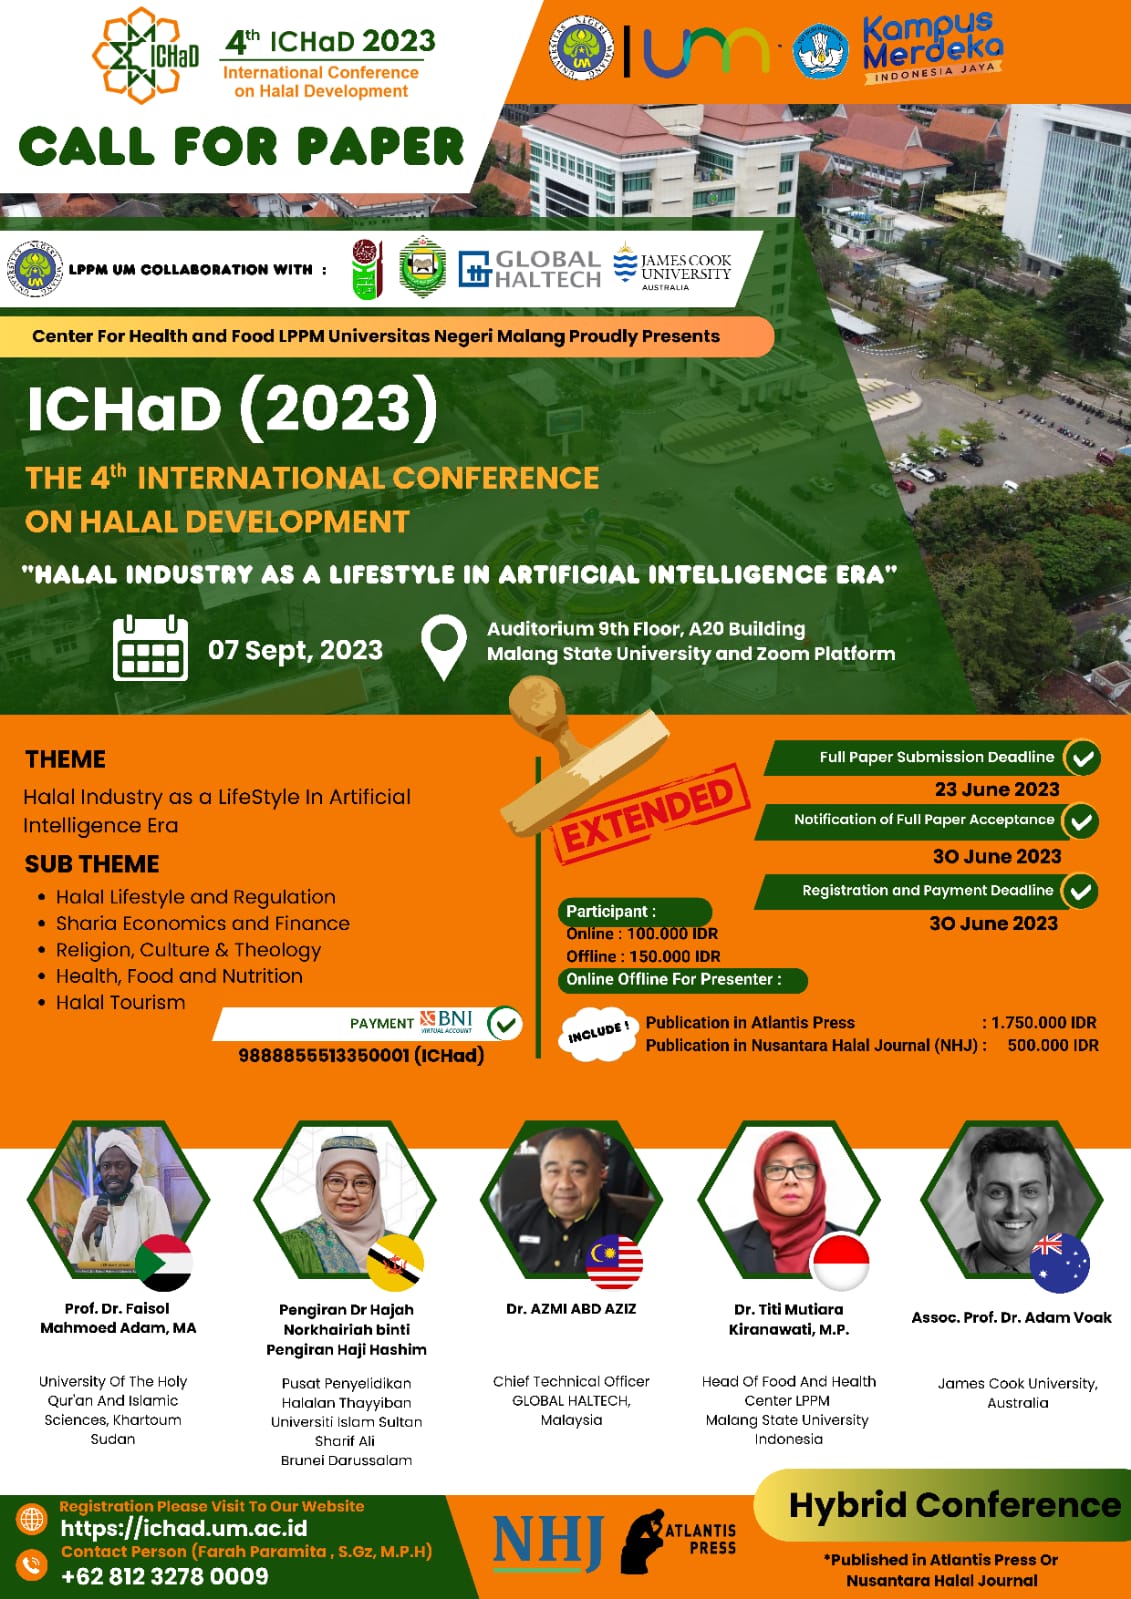 Call for Paper The 4th International Conference on Halal Development 2023